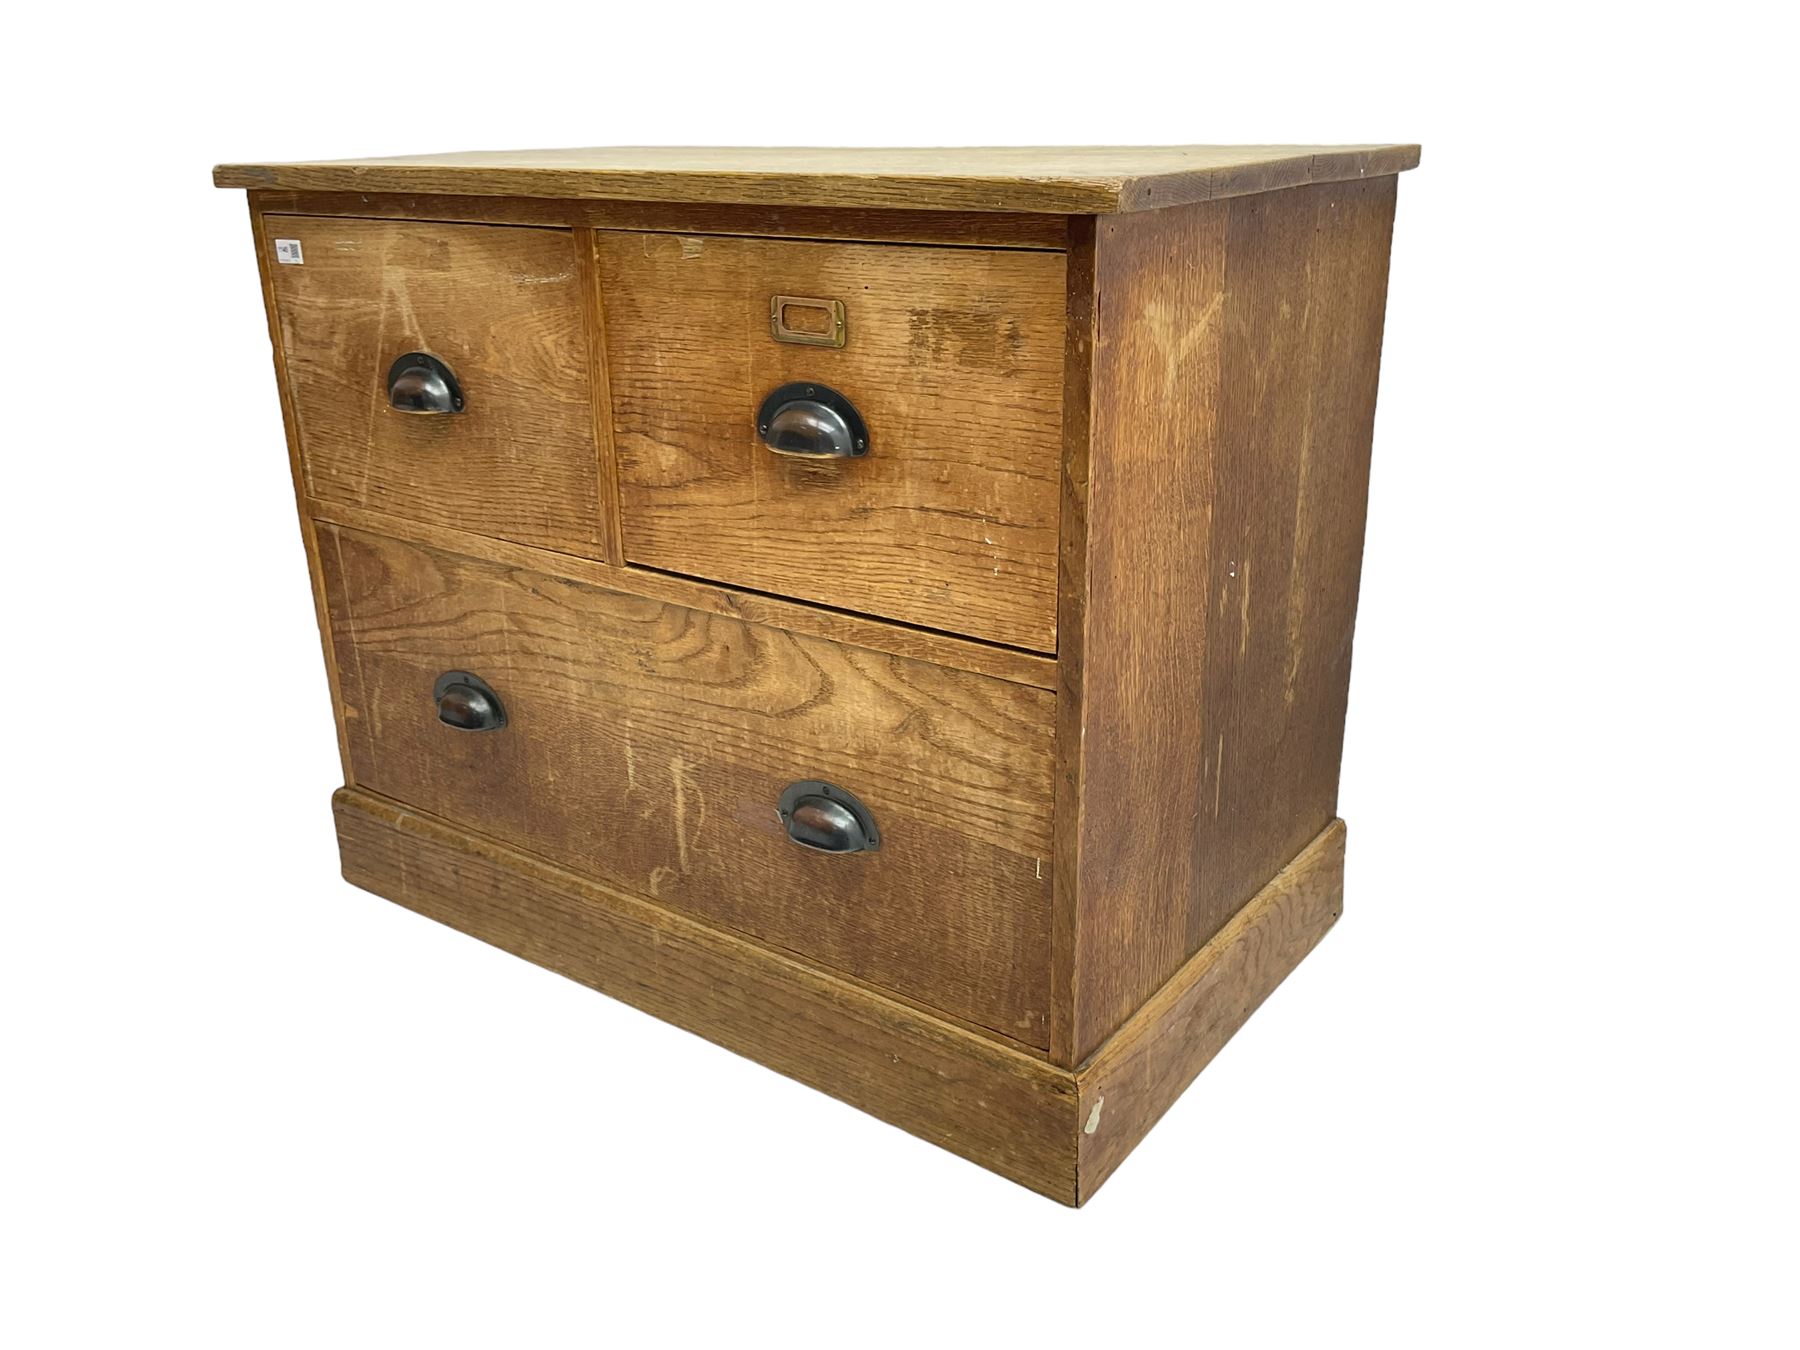 Early to mid-20th century oak chest - Image 3 of 6